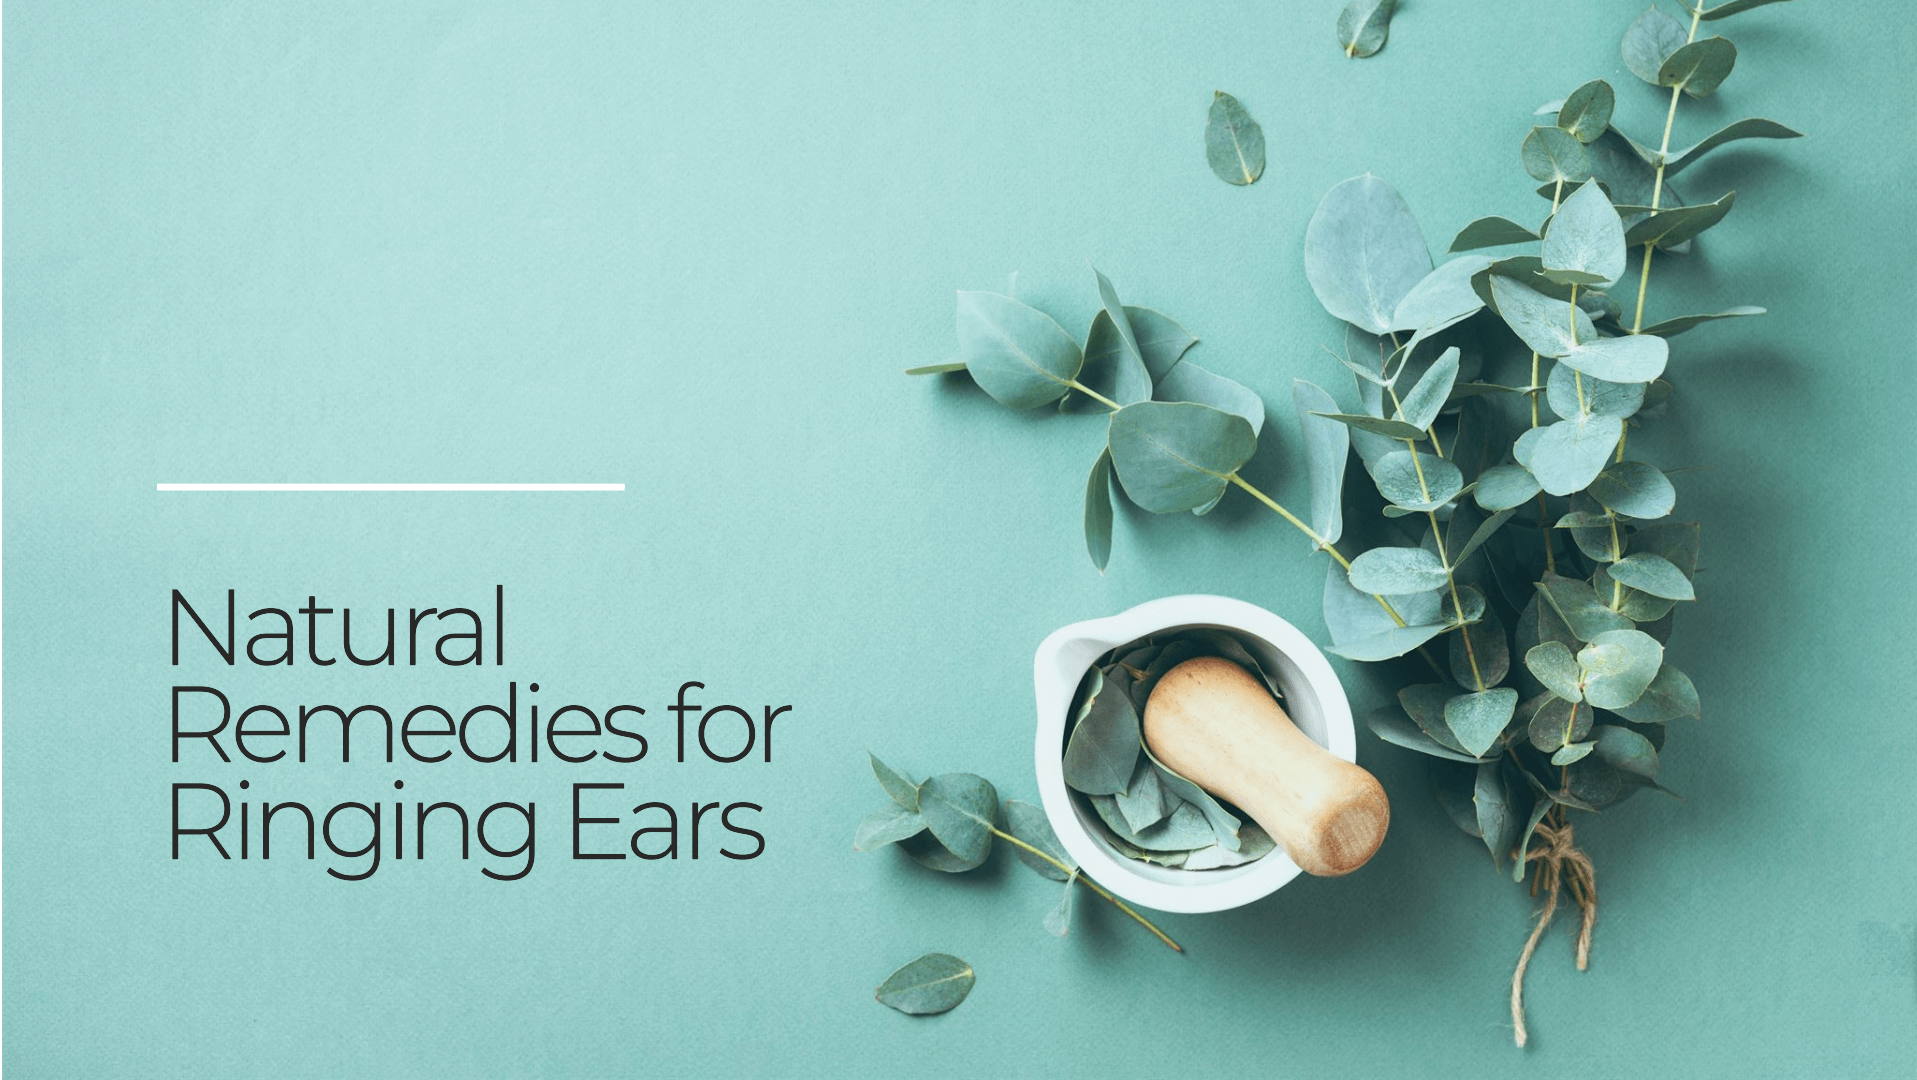 Are There Any Natural Remedies for Managing Tinnitus?